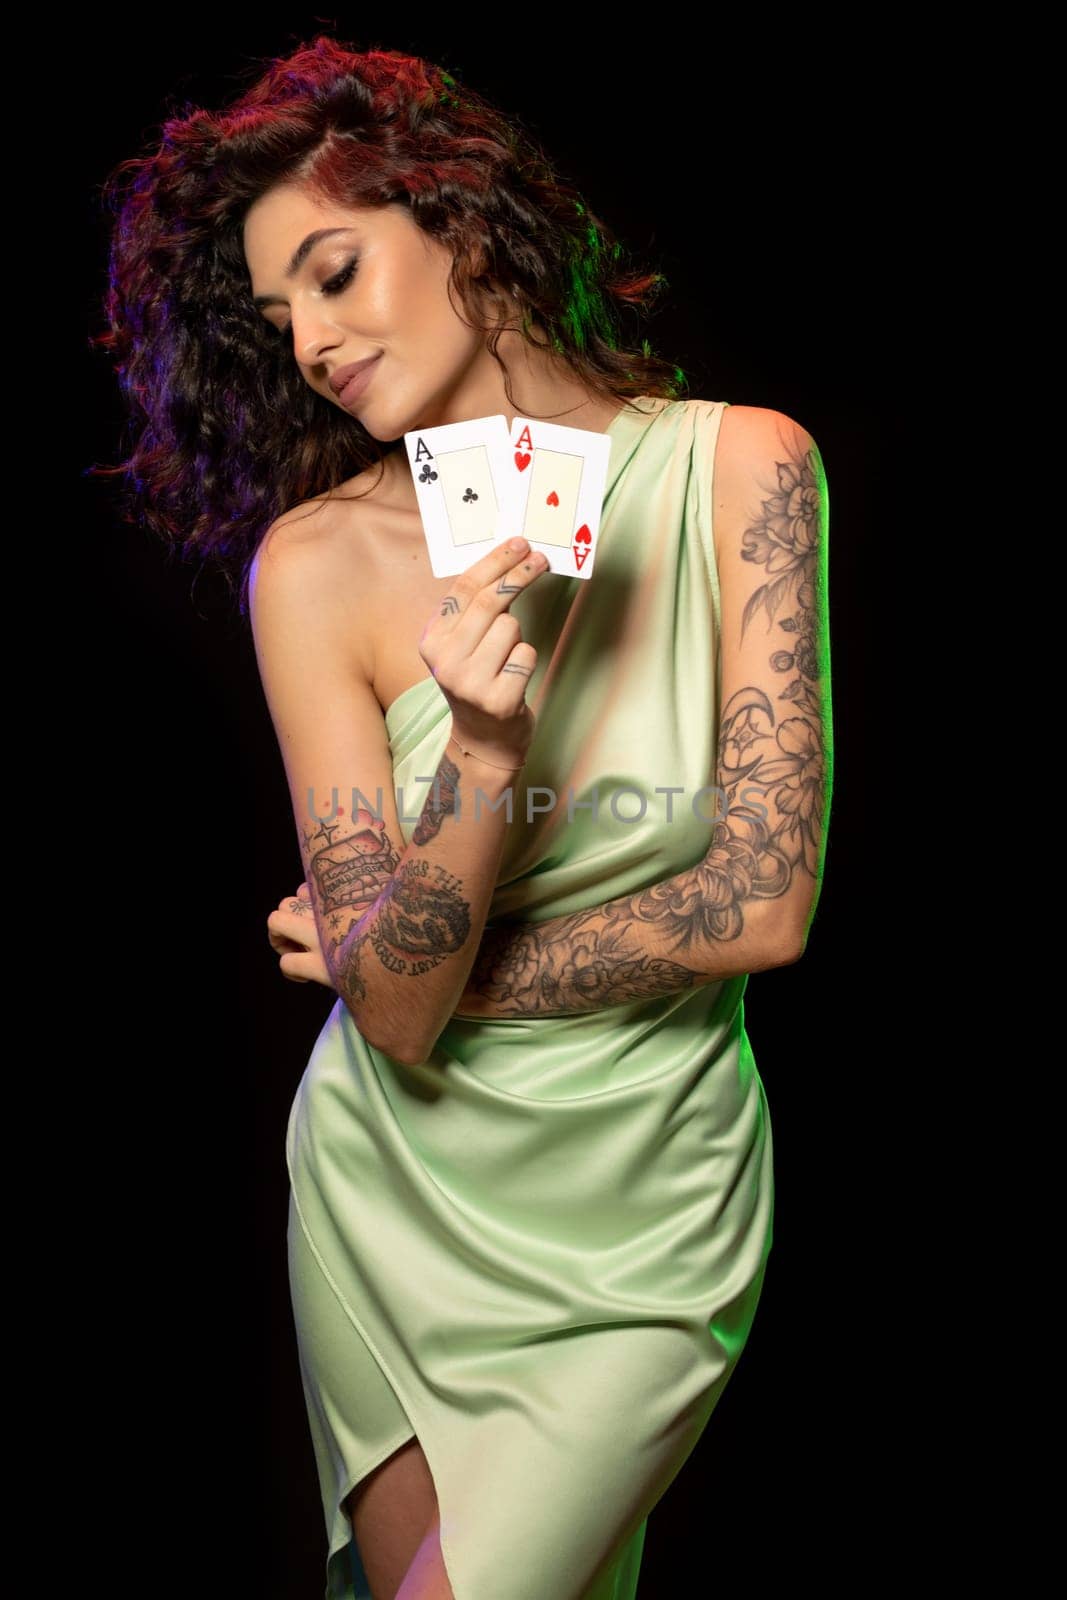 Portrait of smiling young woman in light green dress with tattoo on arms showing pair of aces, standing on dark studio background. Poker game concept